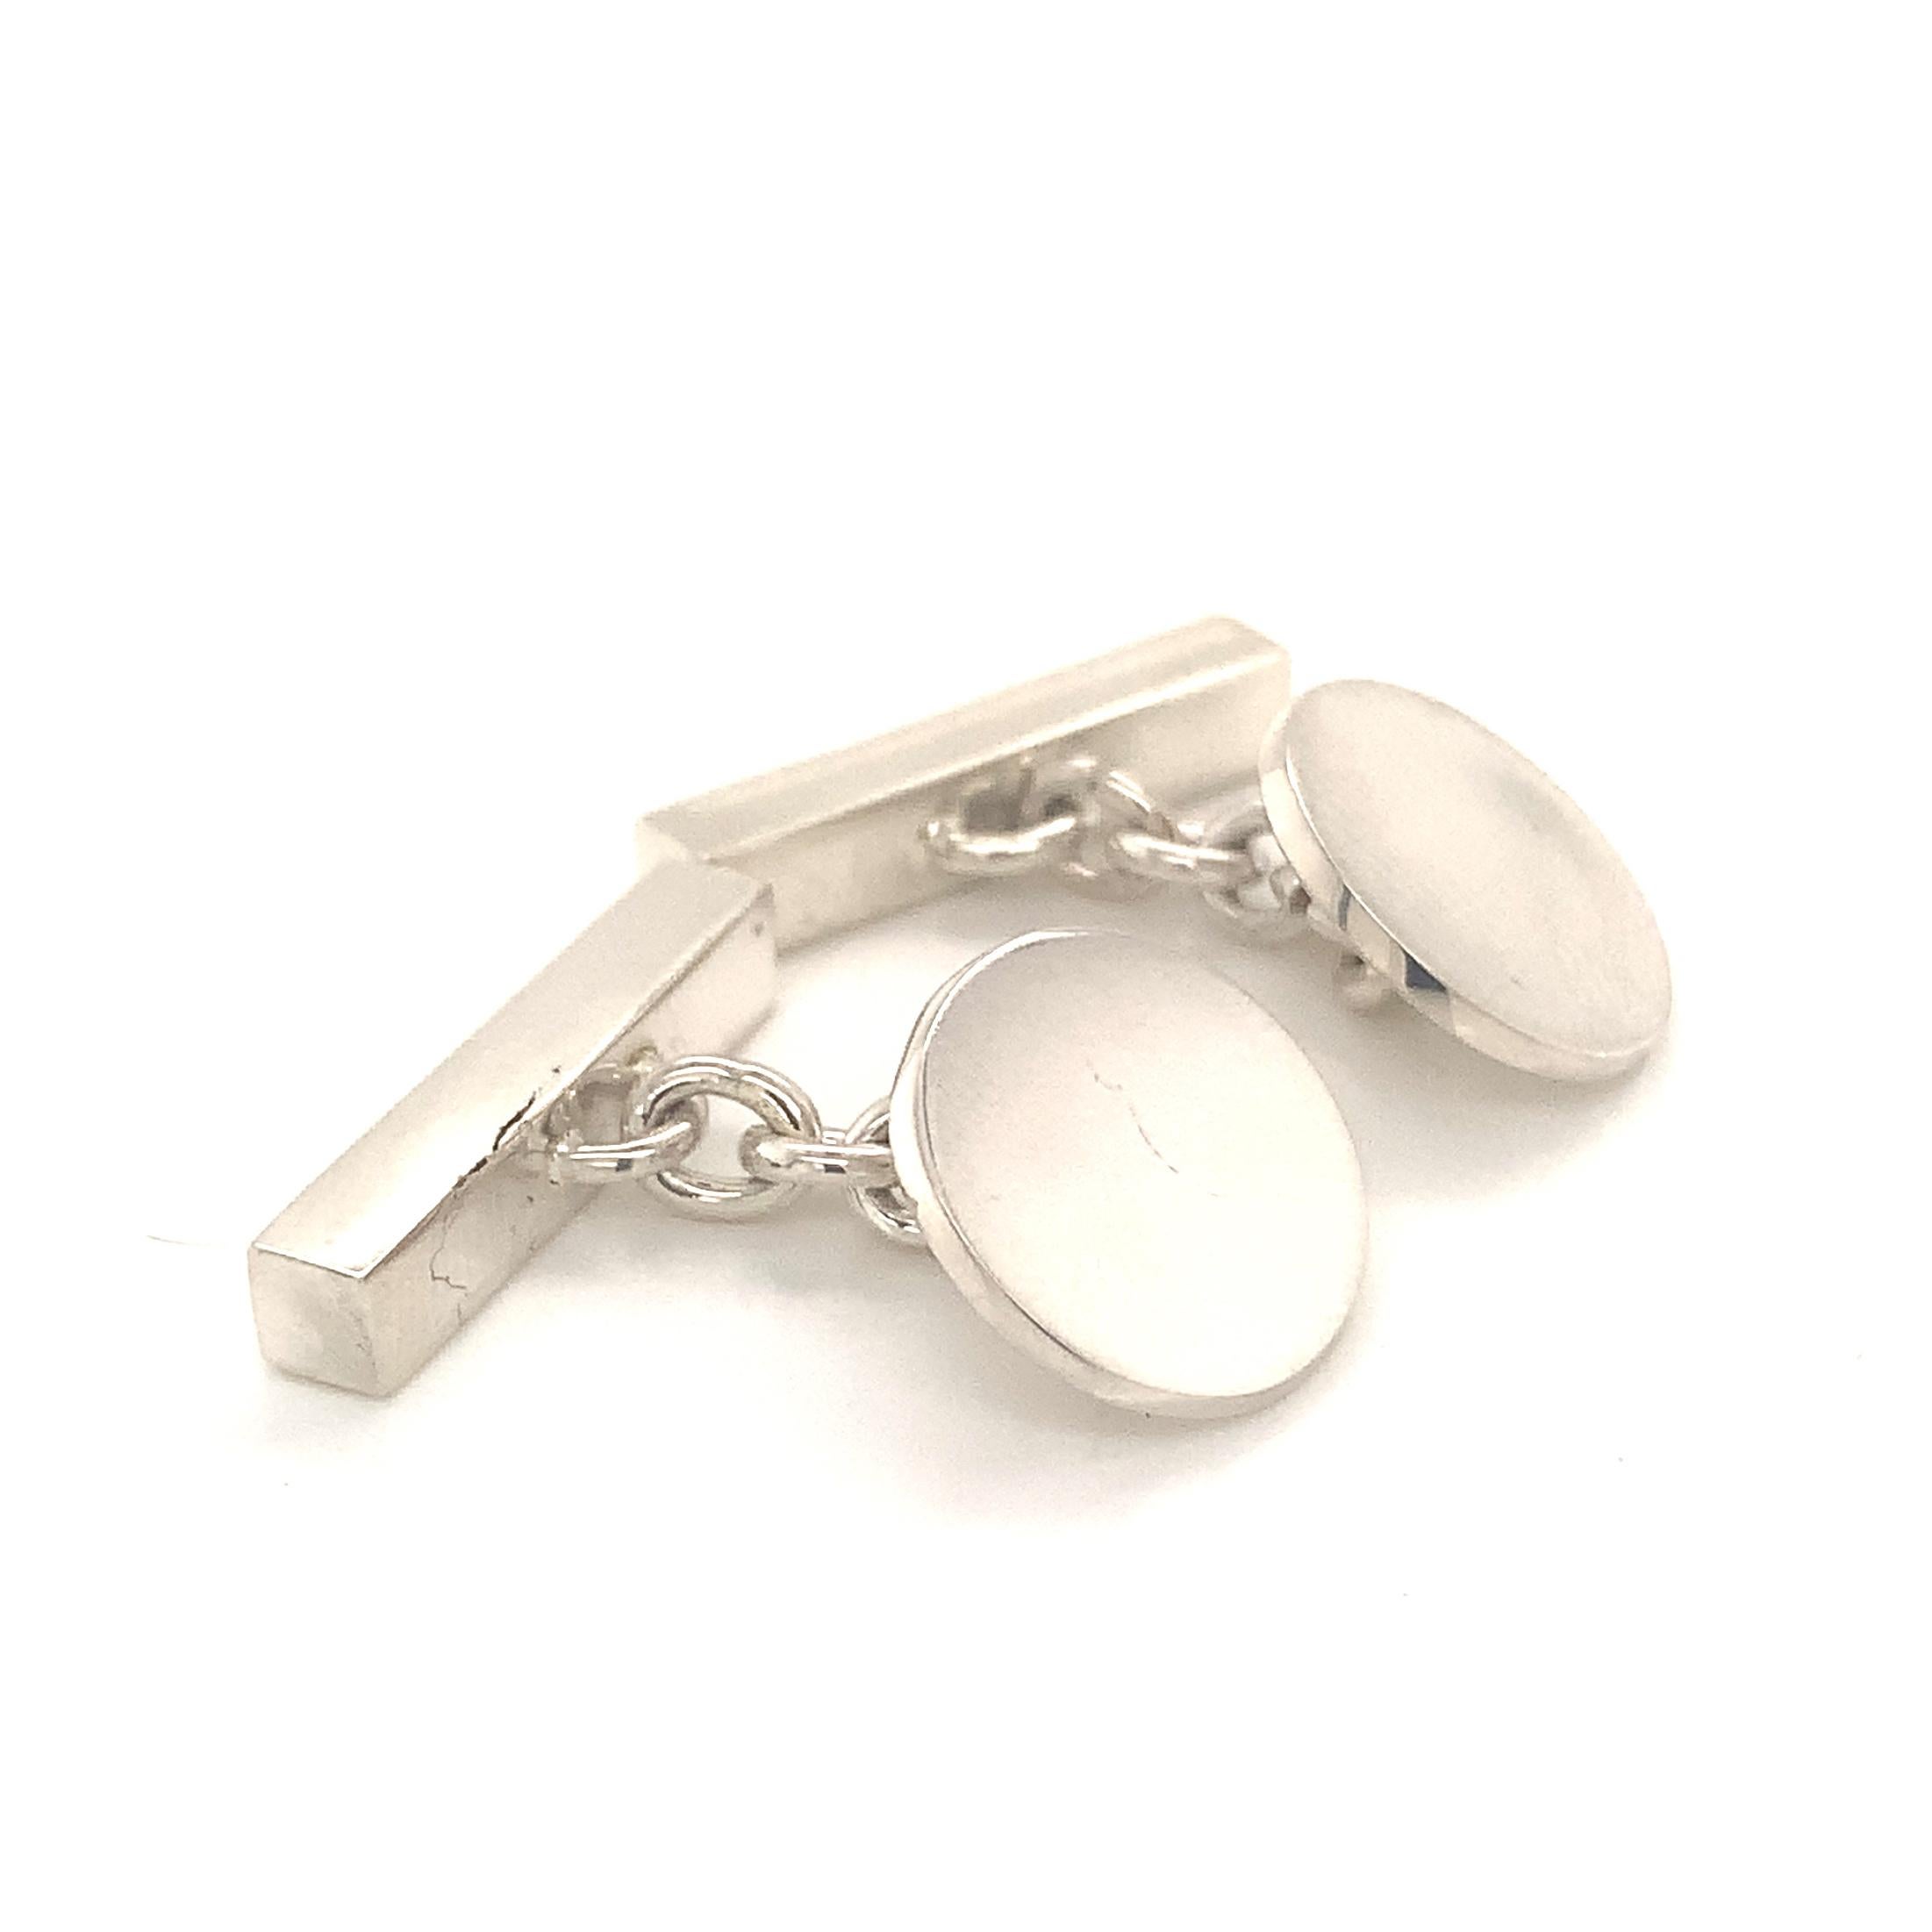 Tiffany & Co. Cufflinks Sterling Silver 925 10.9 Grams TIF25

With a weight of 10.9 grams

100% authentic guaranteed

Newly polished and looks like-new condition

We have taken many pictures at different angles for you to see how fabulous the